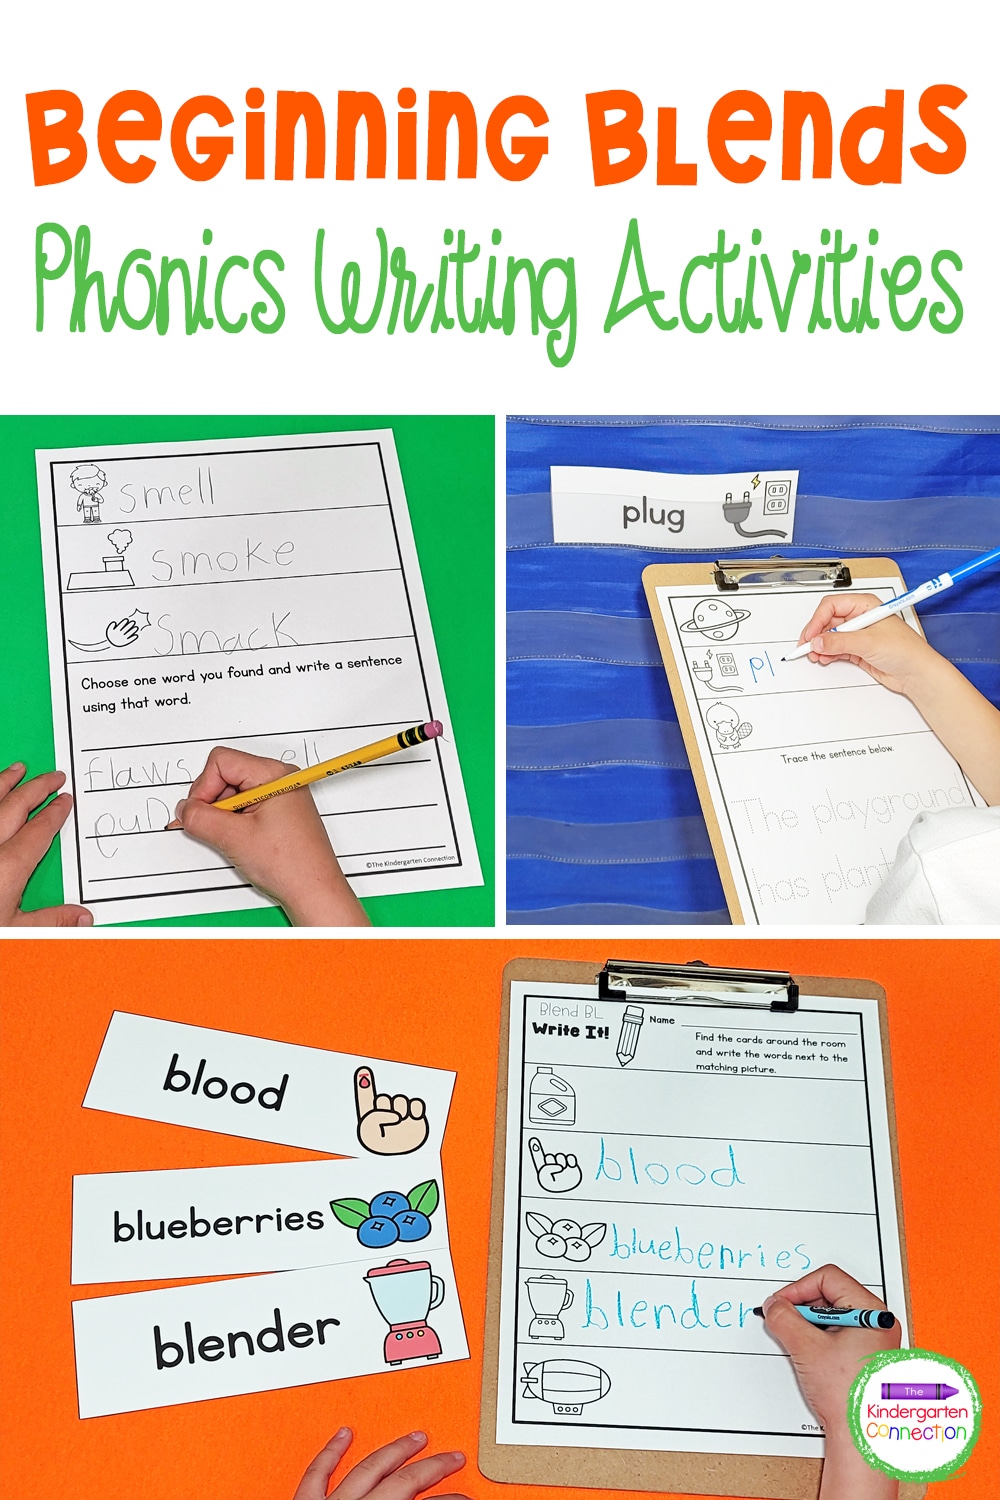 These Blends Phonics Writing Activities for Kindergarten reinforce important reading skills and encourage movement.